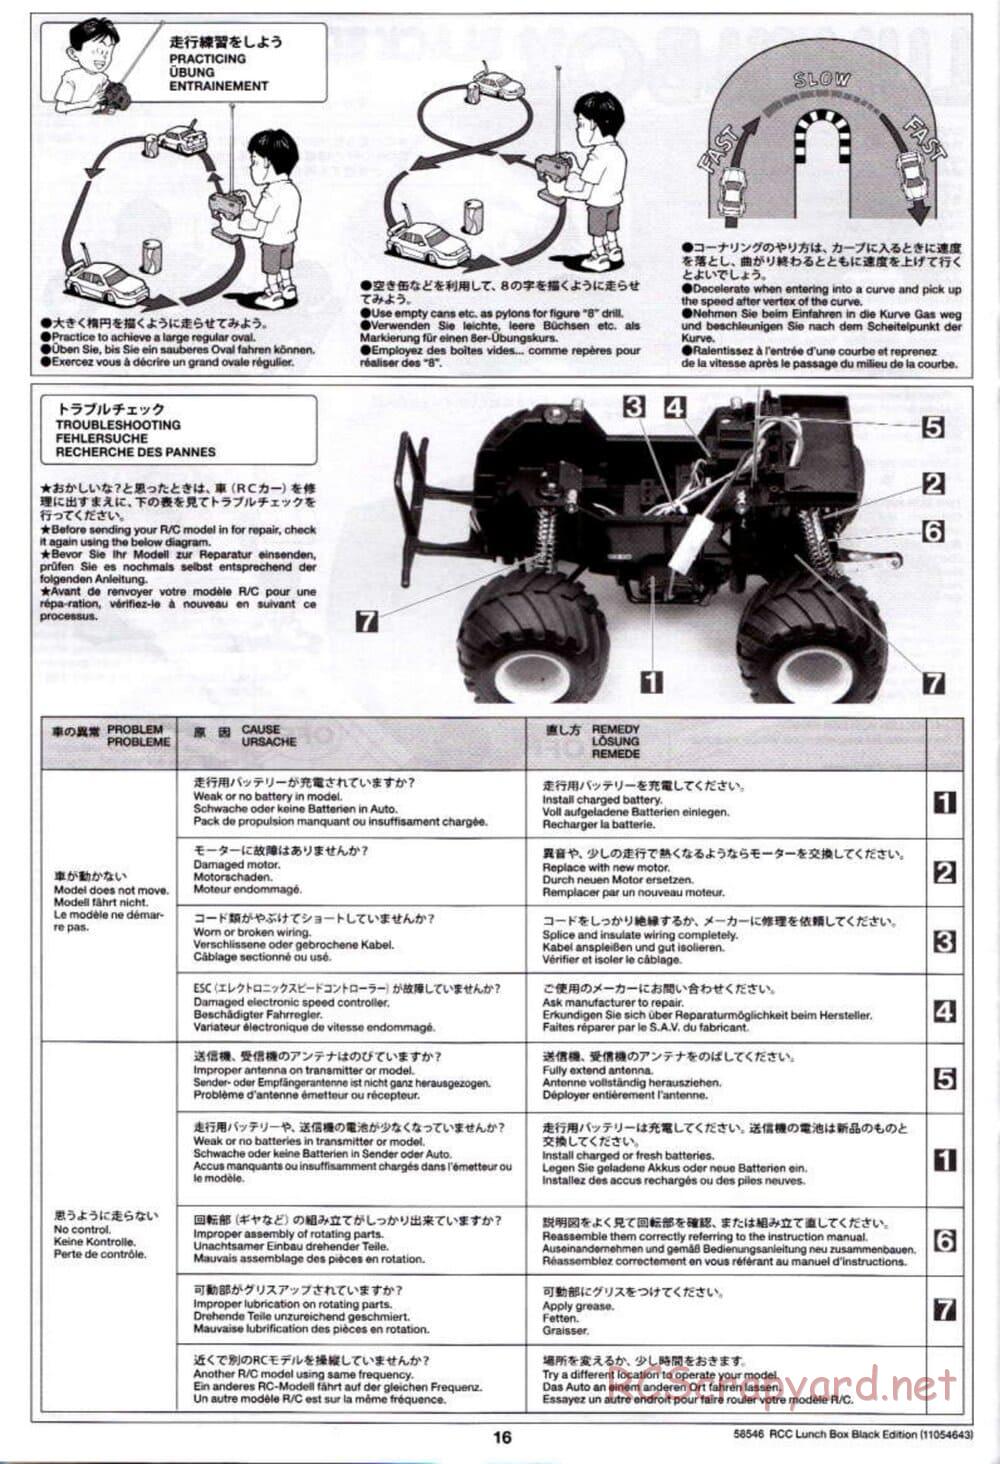 Tamiya - Lunch Box - Black Edition - CW-01 Chassis - Manual - Page 16